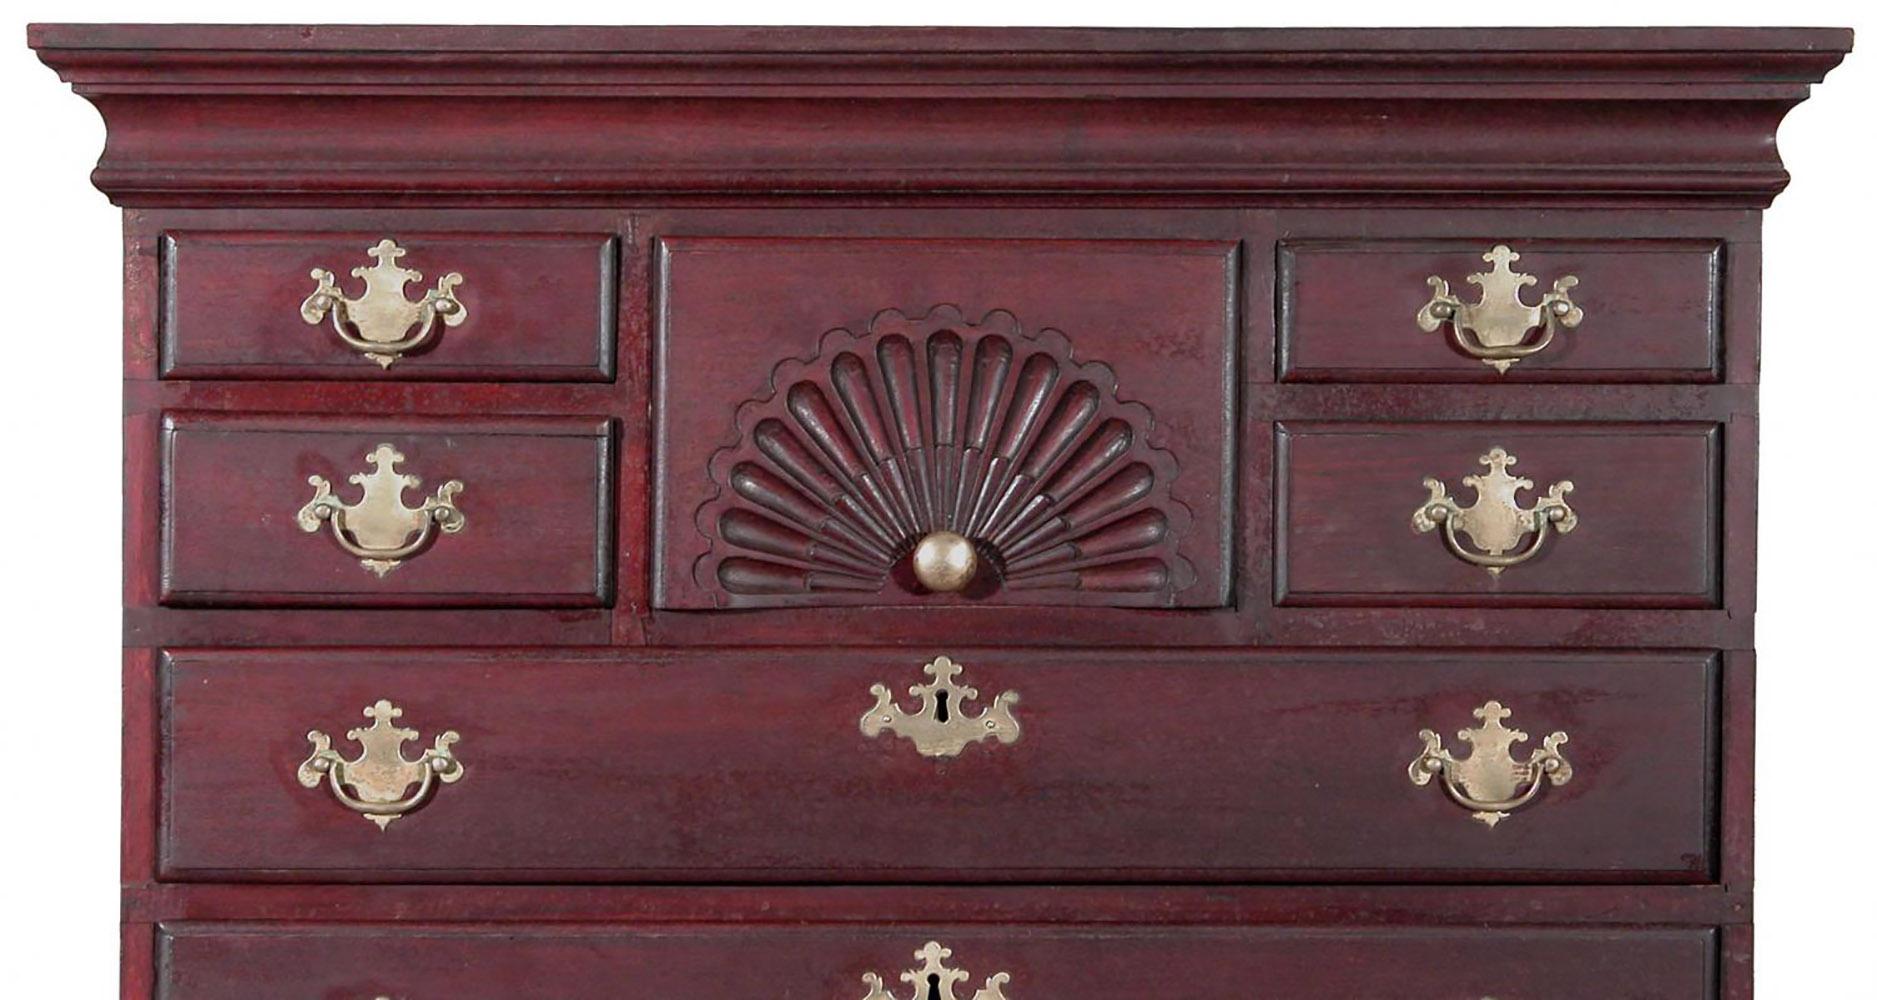 This small scale piece is in all original condition, we have left it untouched, circa 1800. We are proud to offer what we believe is one of the finest diminutive New Hampshire chests in Dunlap's ?uvre, with its original brasses and best shell. This